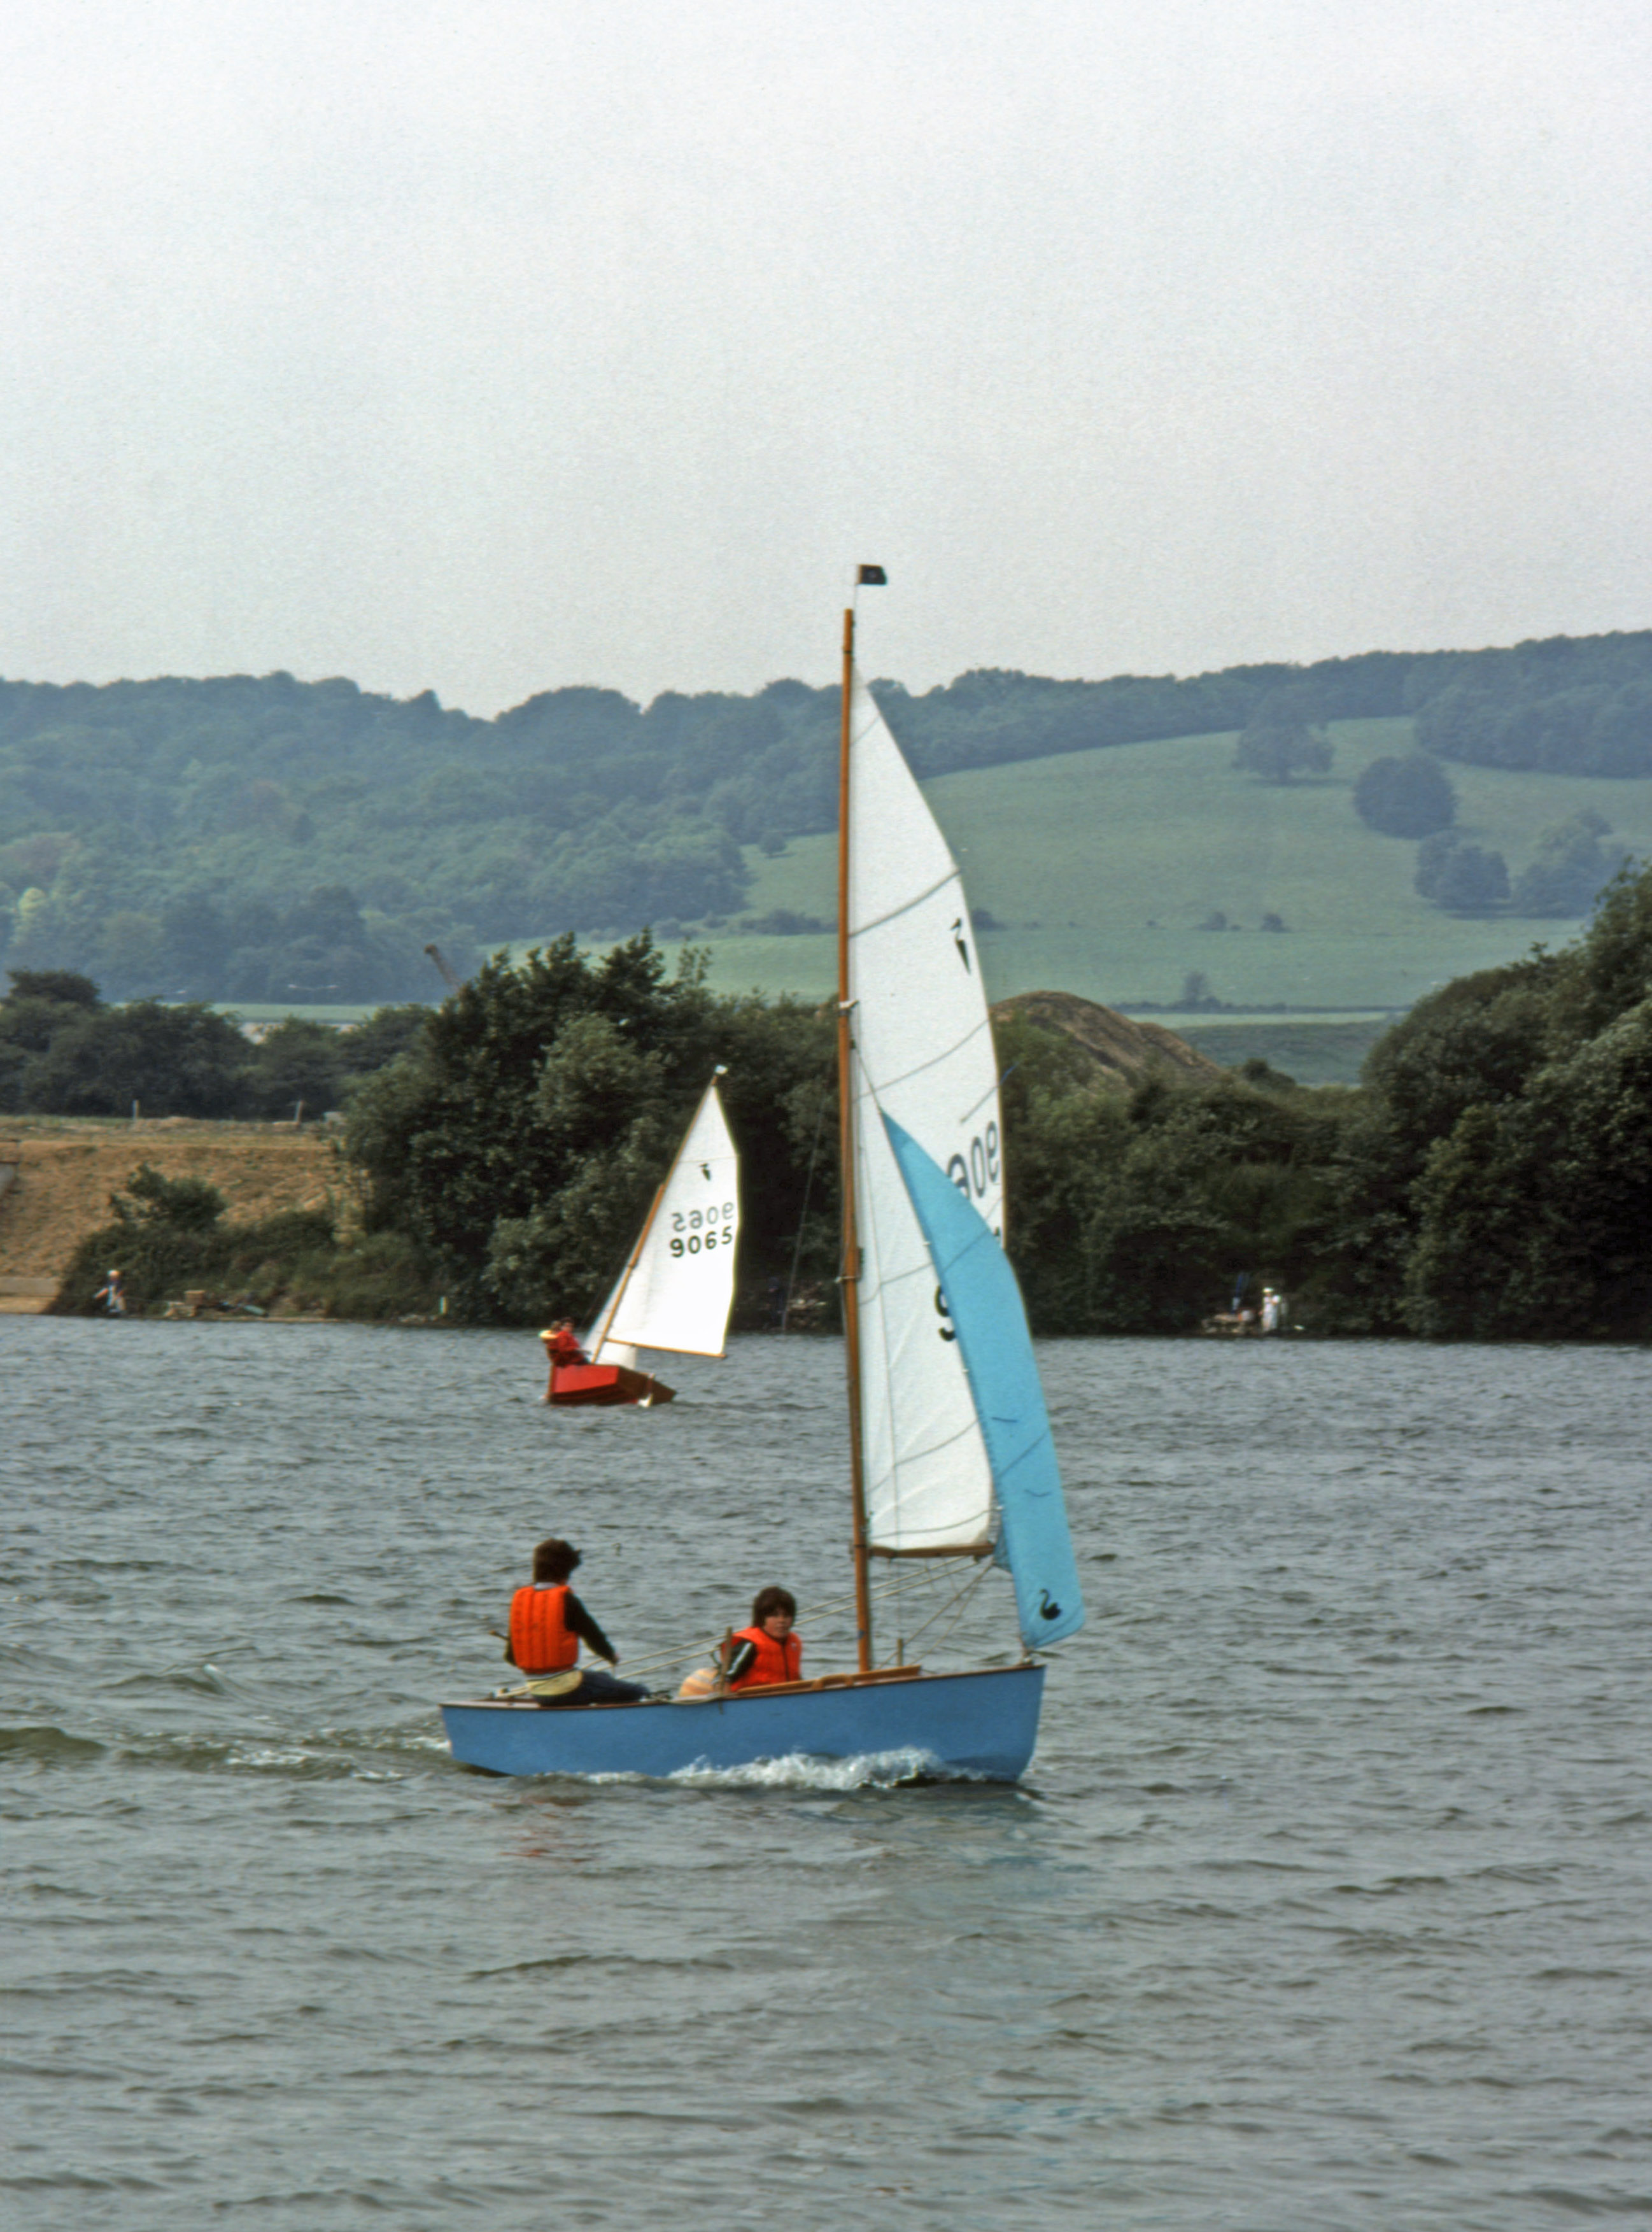 7906718 July 1979 - It was quite windy which suited John, but several of the other boats found this difficult to cope with.